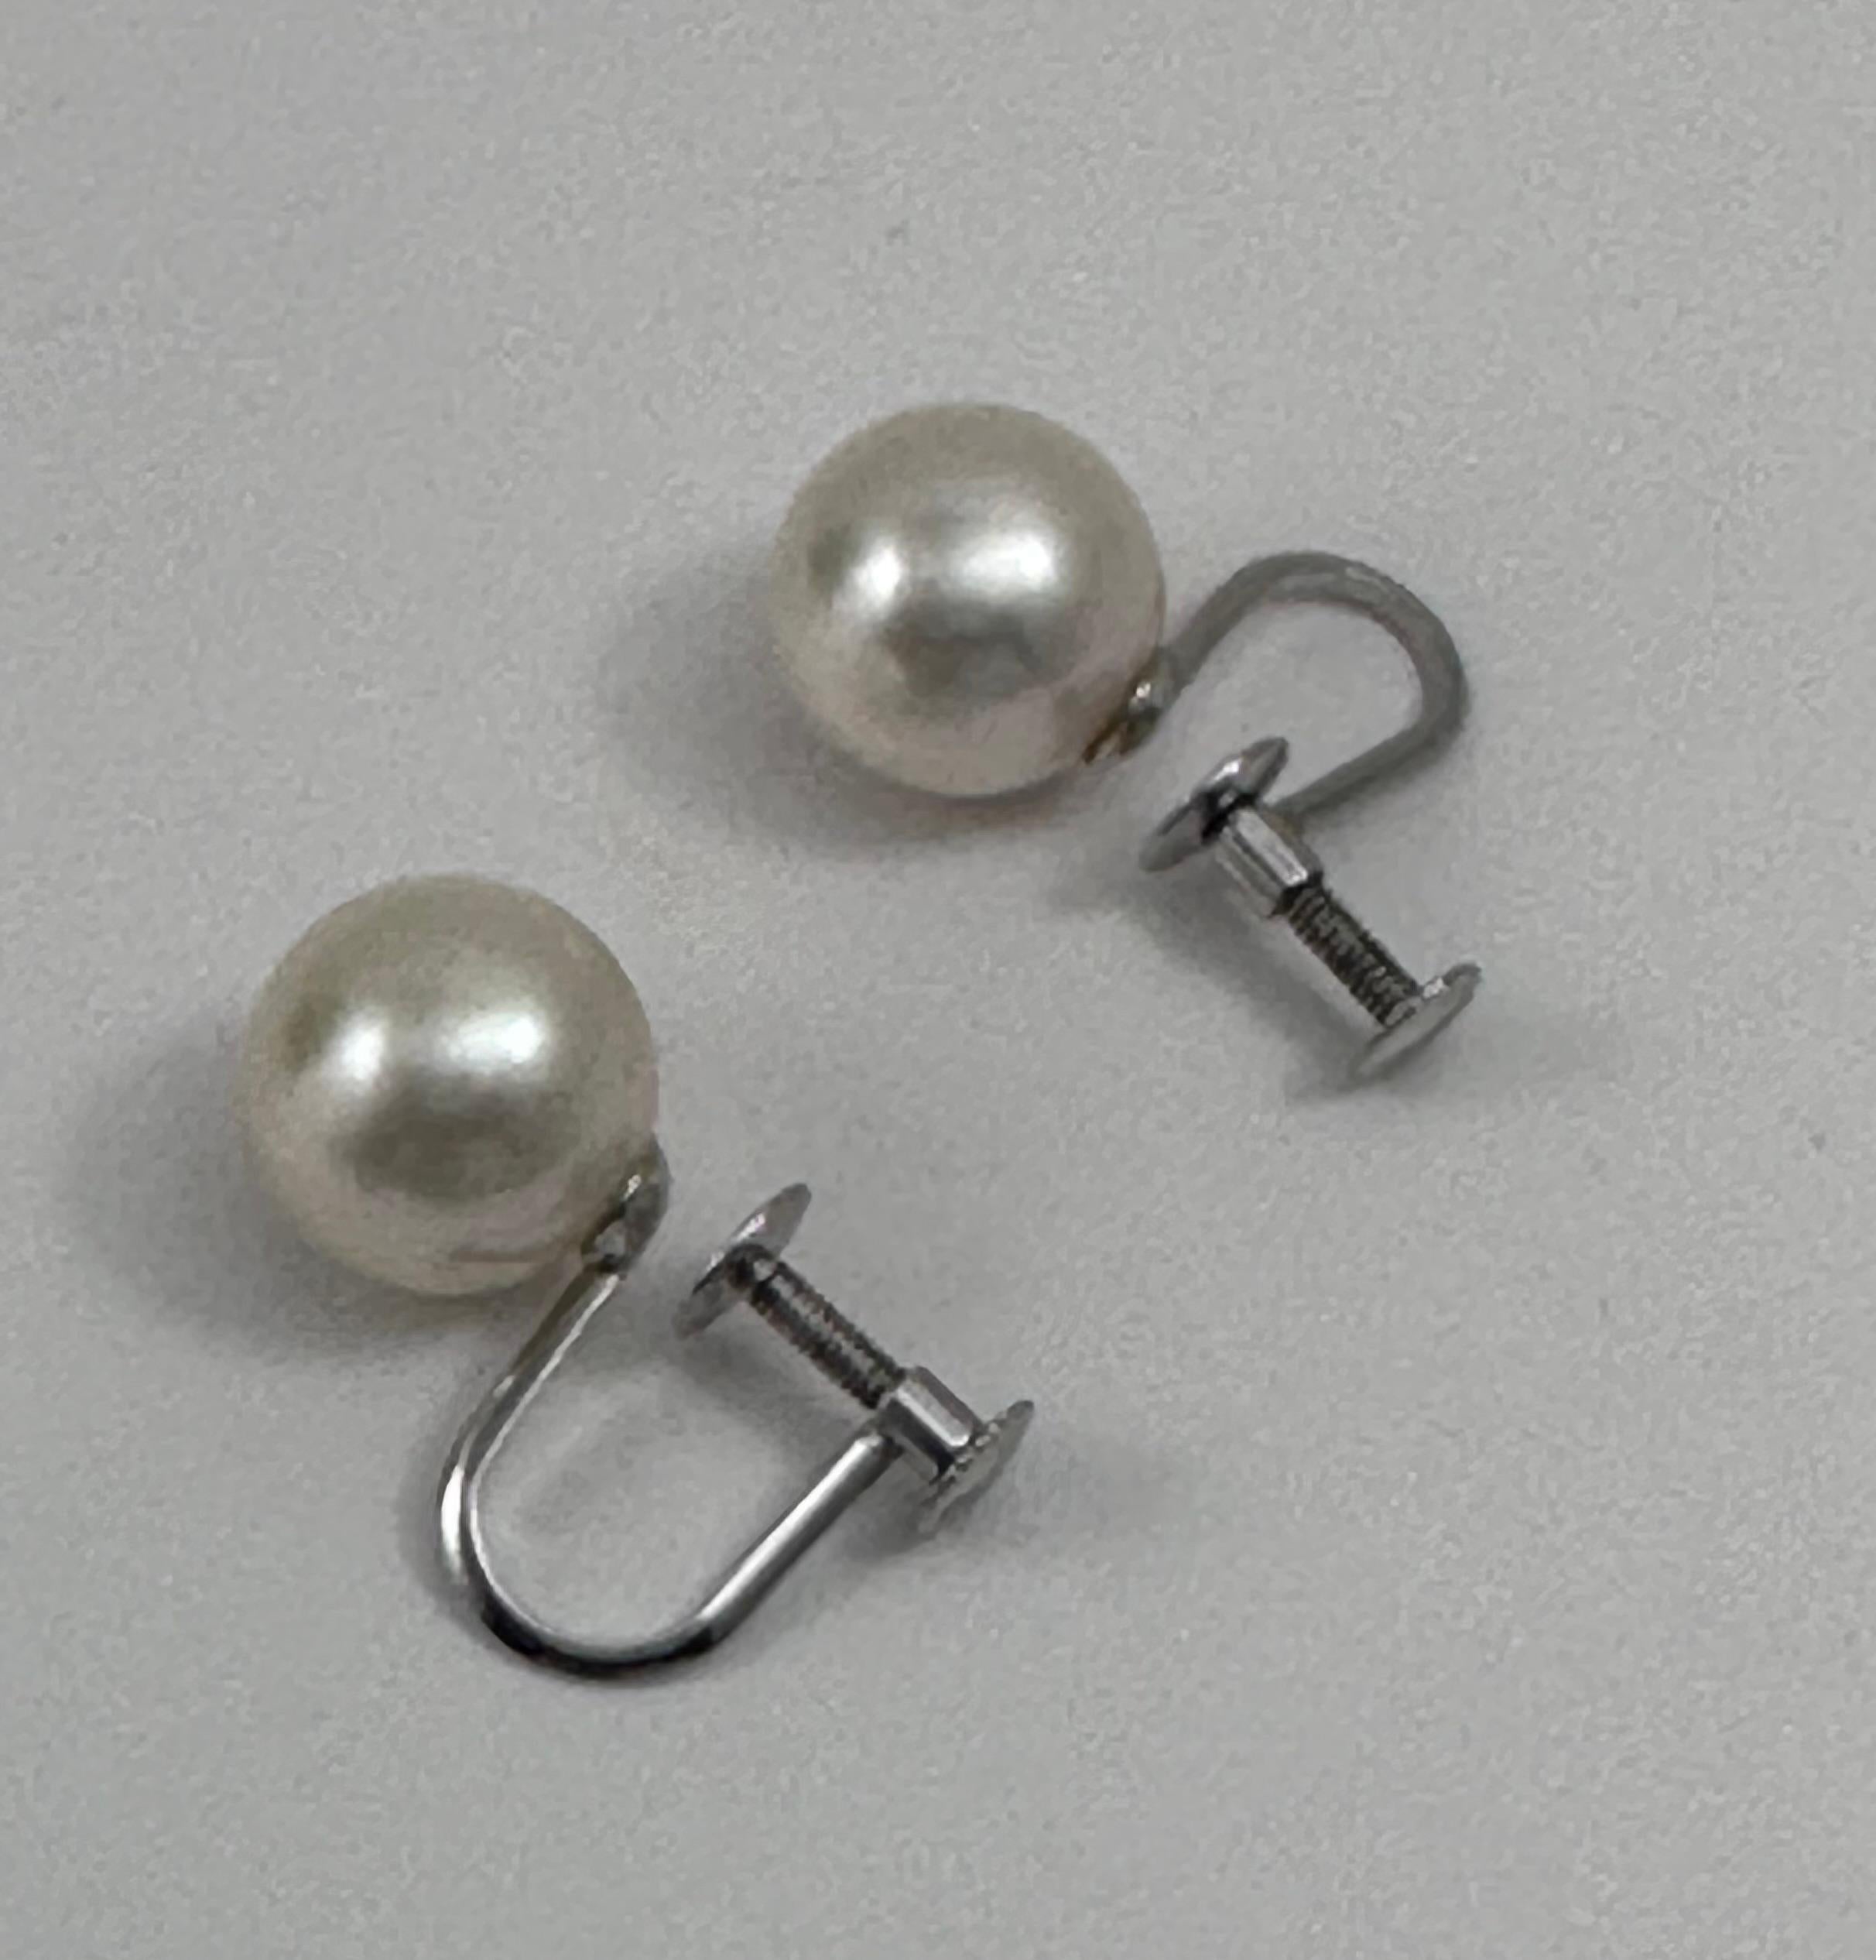 Vintage Platinum850 Gold 9mm Lustrous Pearl Screw Back Earrings

Pearls are dainty, pale, shiny, round, and precious objects that effortlessly steal our interest. Since ancient times, pearls linger in our imagination and beliefs. To the extent that